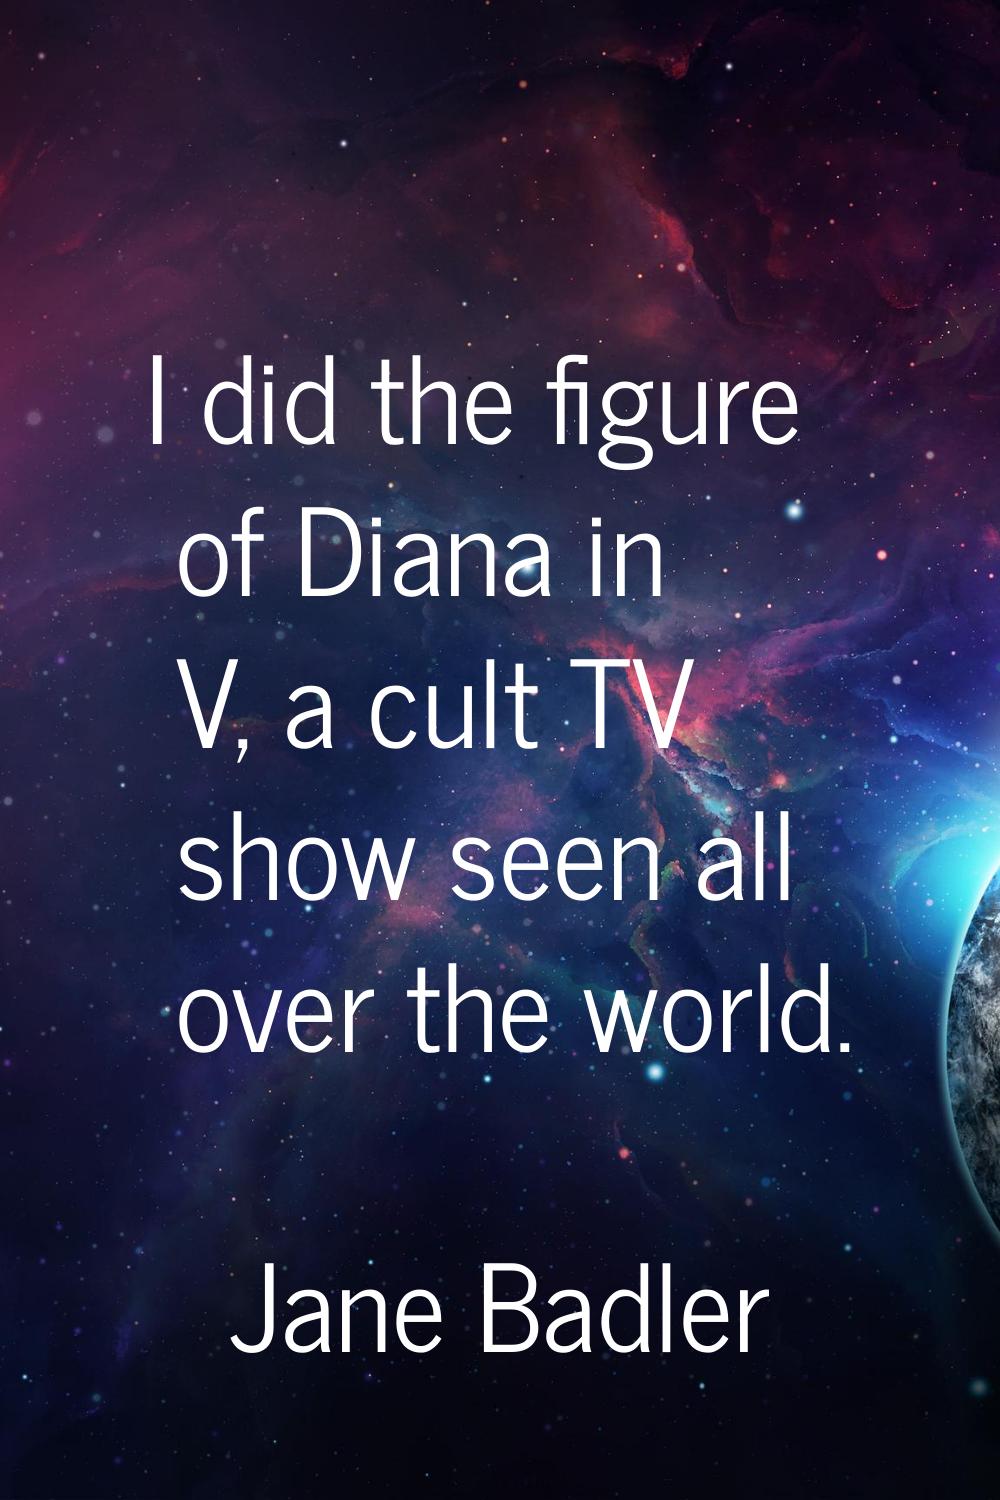 I did the figure of Diana in V, a cult TV show seen all over the world.